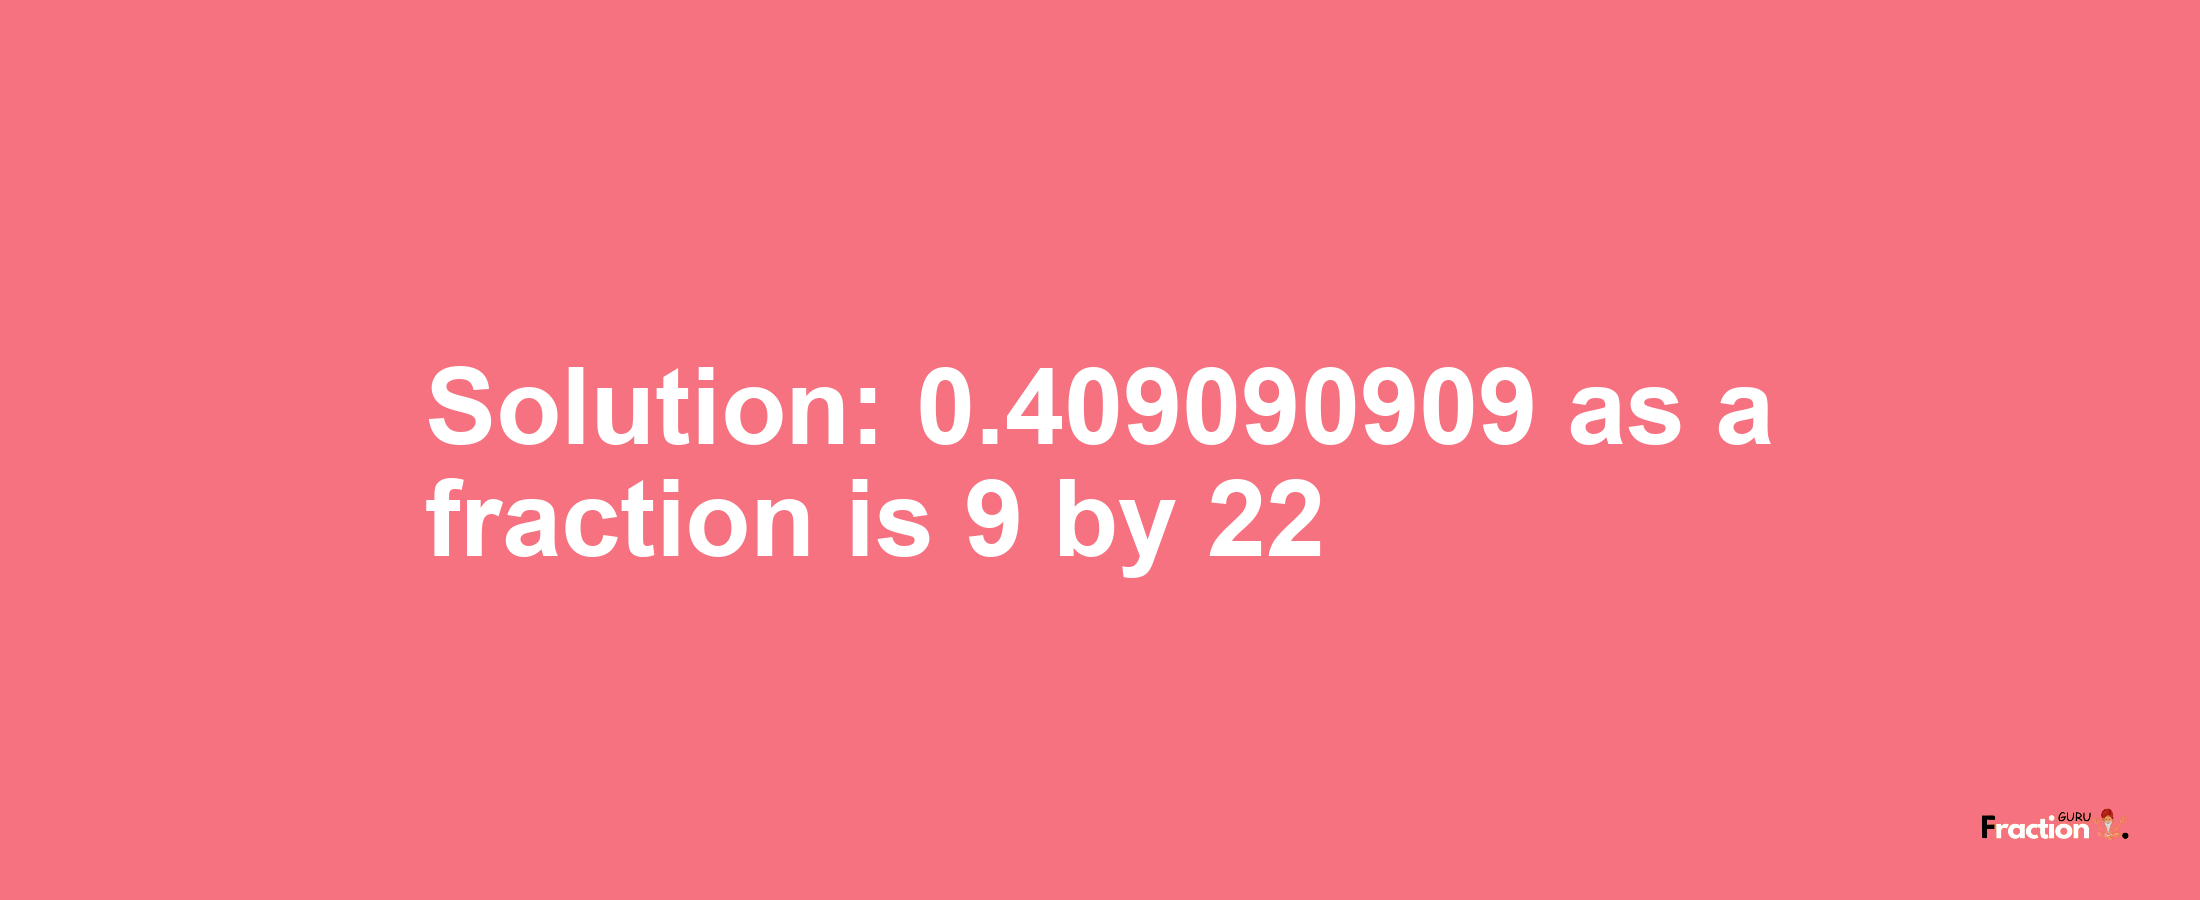 Solution:0.409090909 as a fraction is 9/22